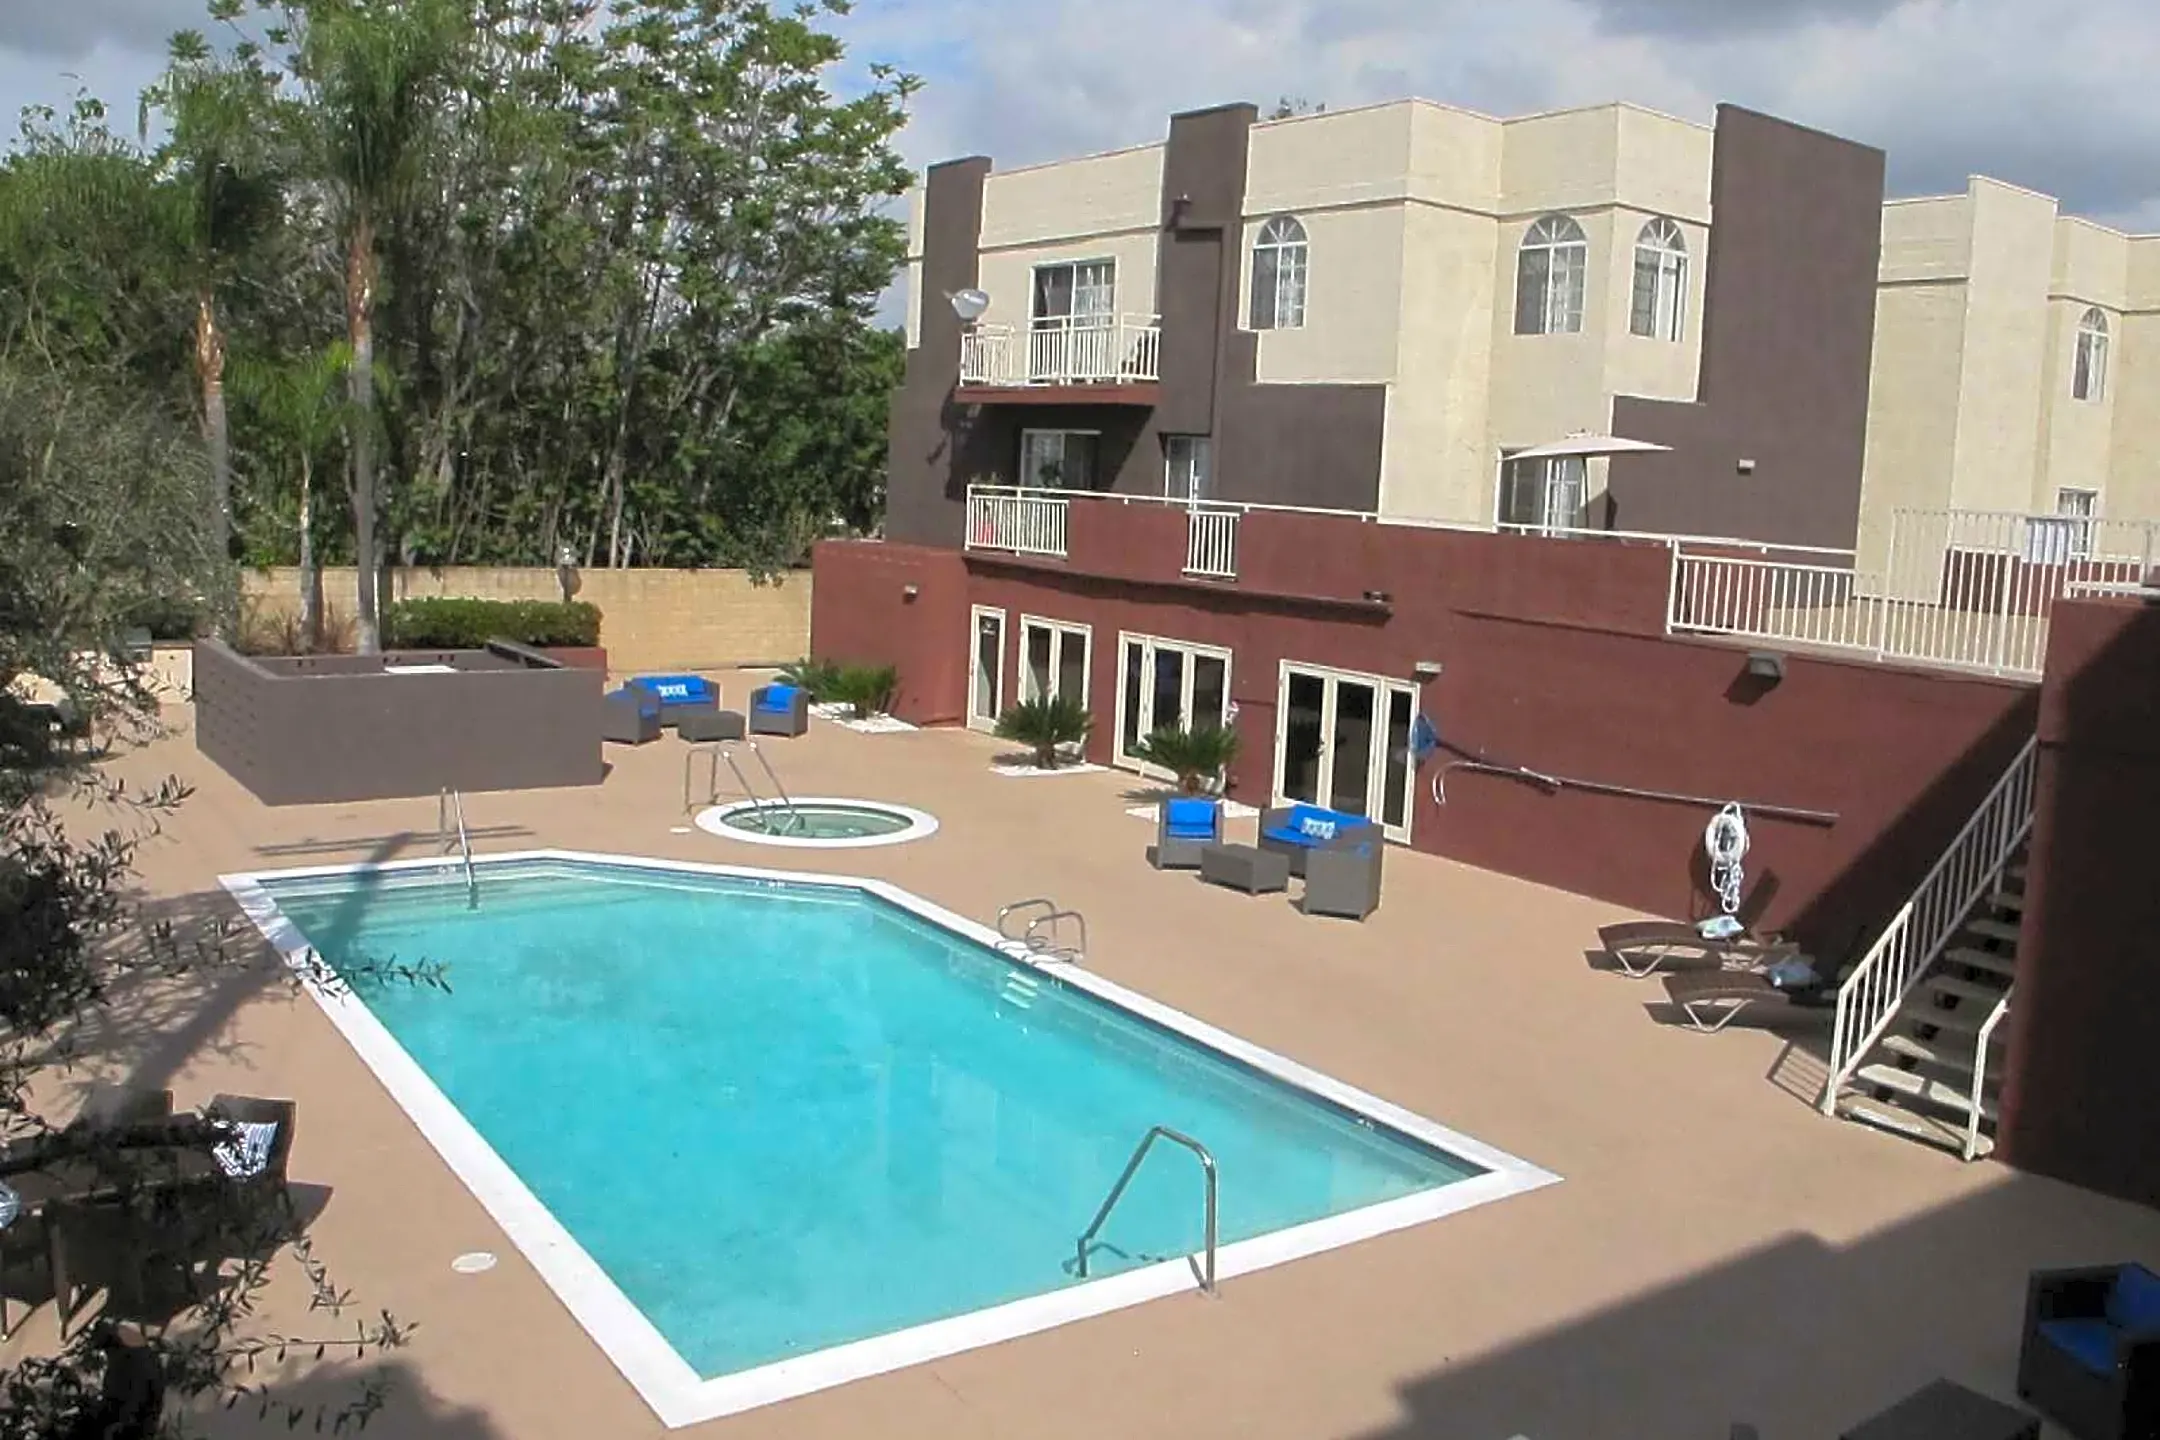 Pool - Sunset Terrace Apartments Homes - Panorama City, CA